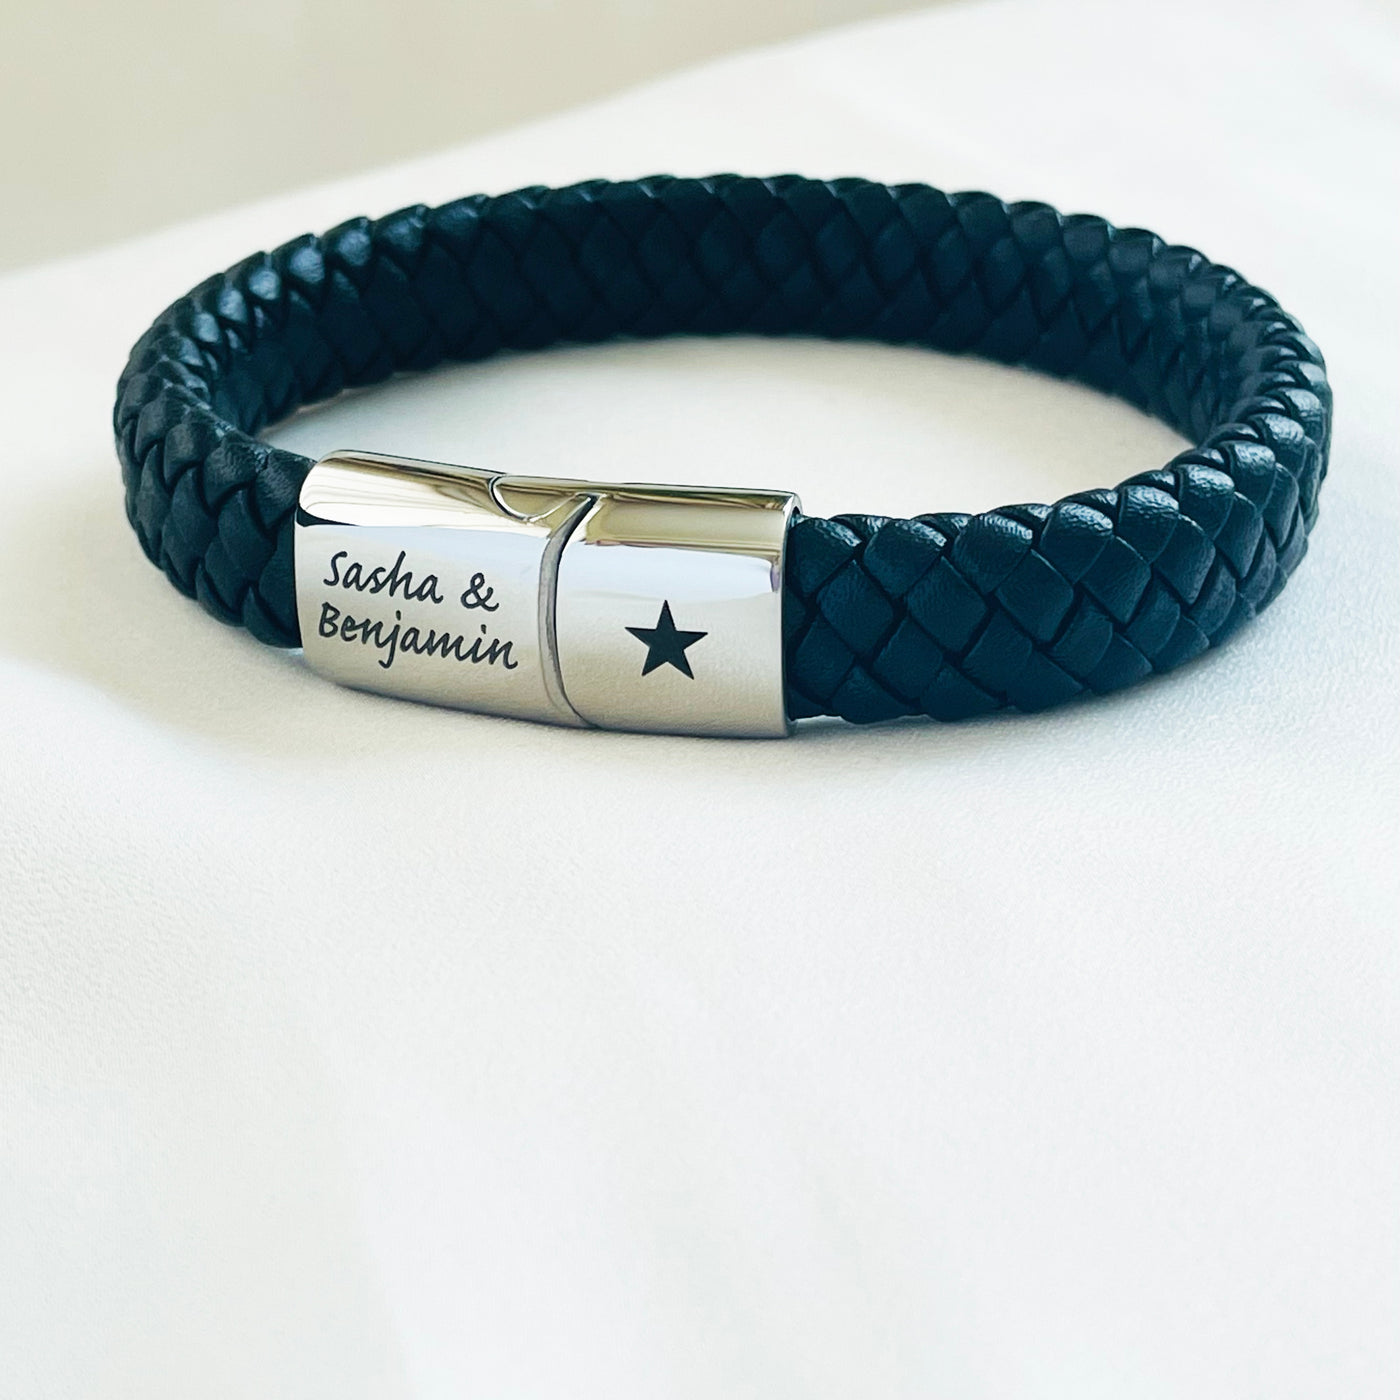 MEN'S PERSONALIZED LEATHER ENGRAVED BRACELET | FOREVER IMPRINT JEWELLERY